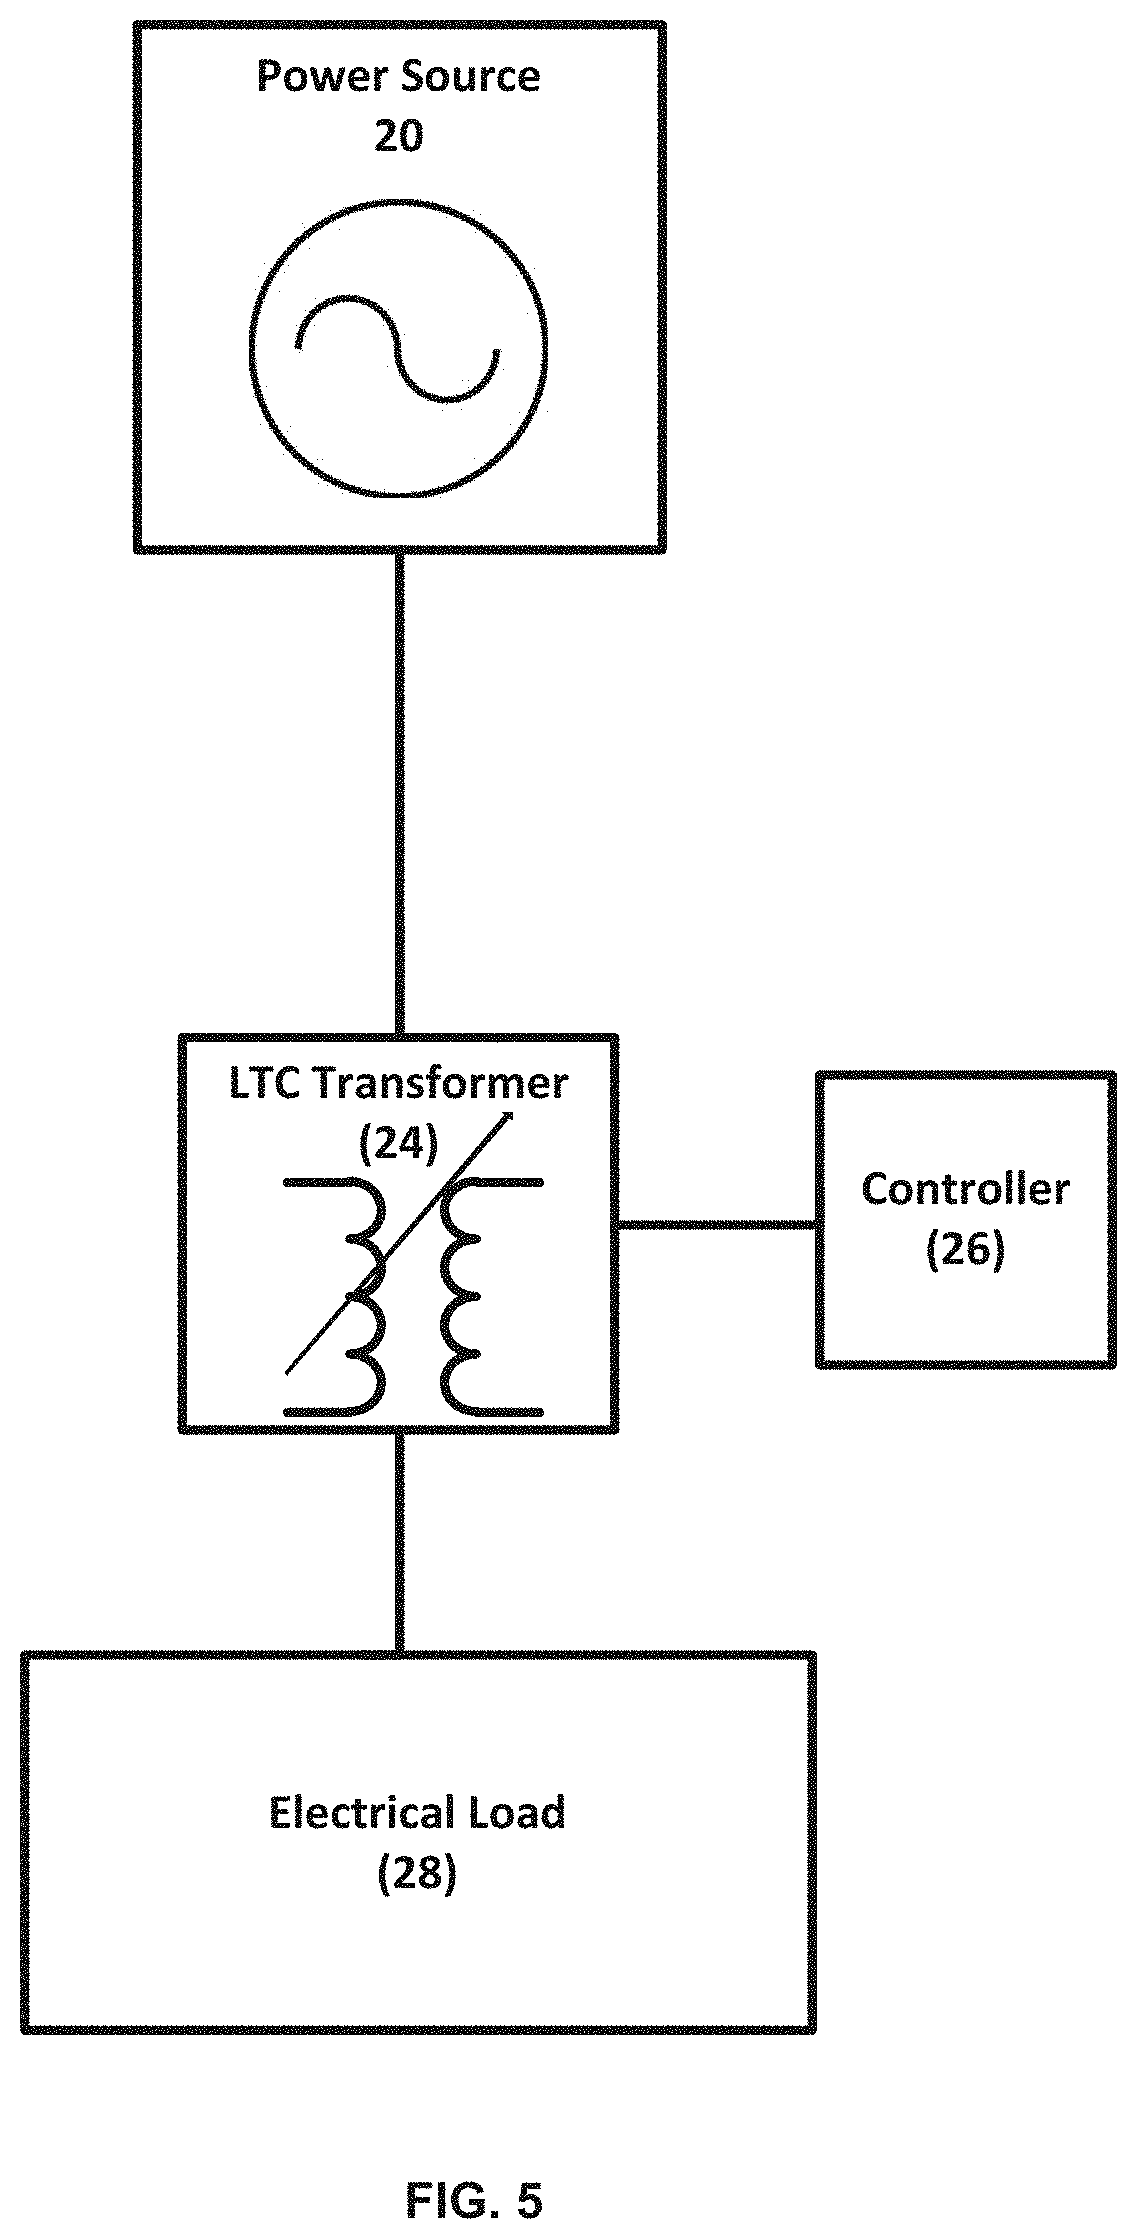 Smart voltage reduction and reverse power operating mode determination for load tap charging transformers and voltage regulators